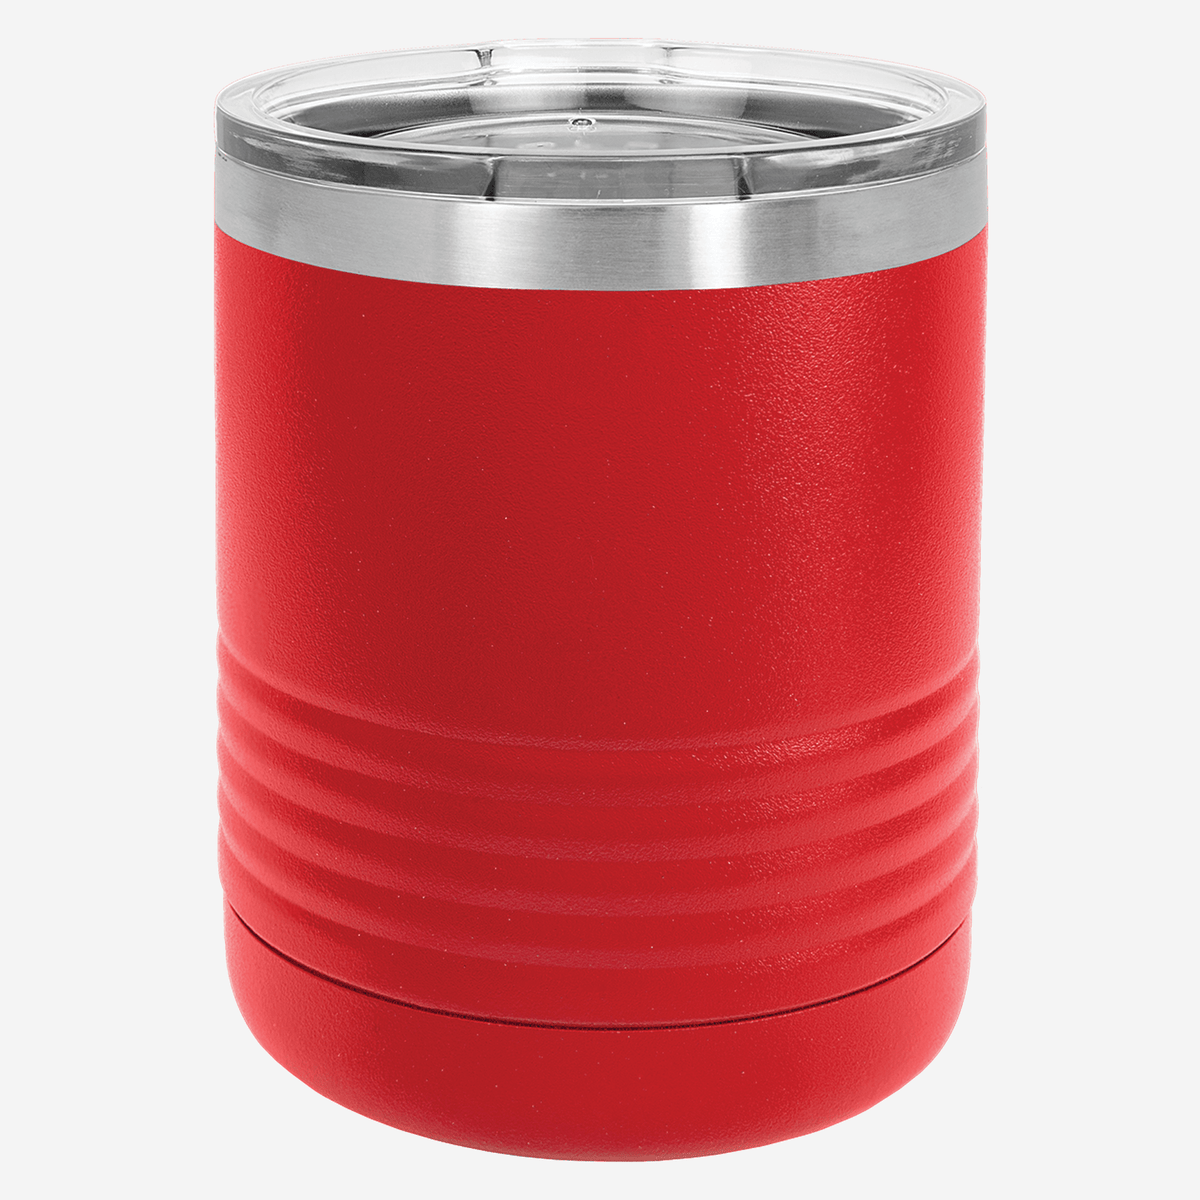 10 oz red tumbler with lid grip rings on the bottom